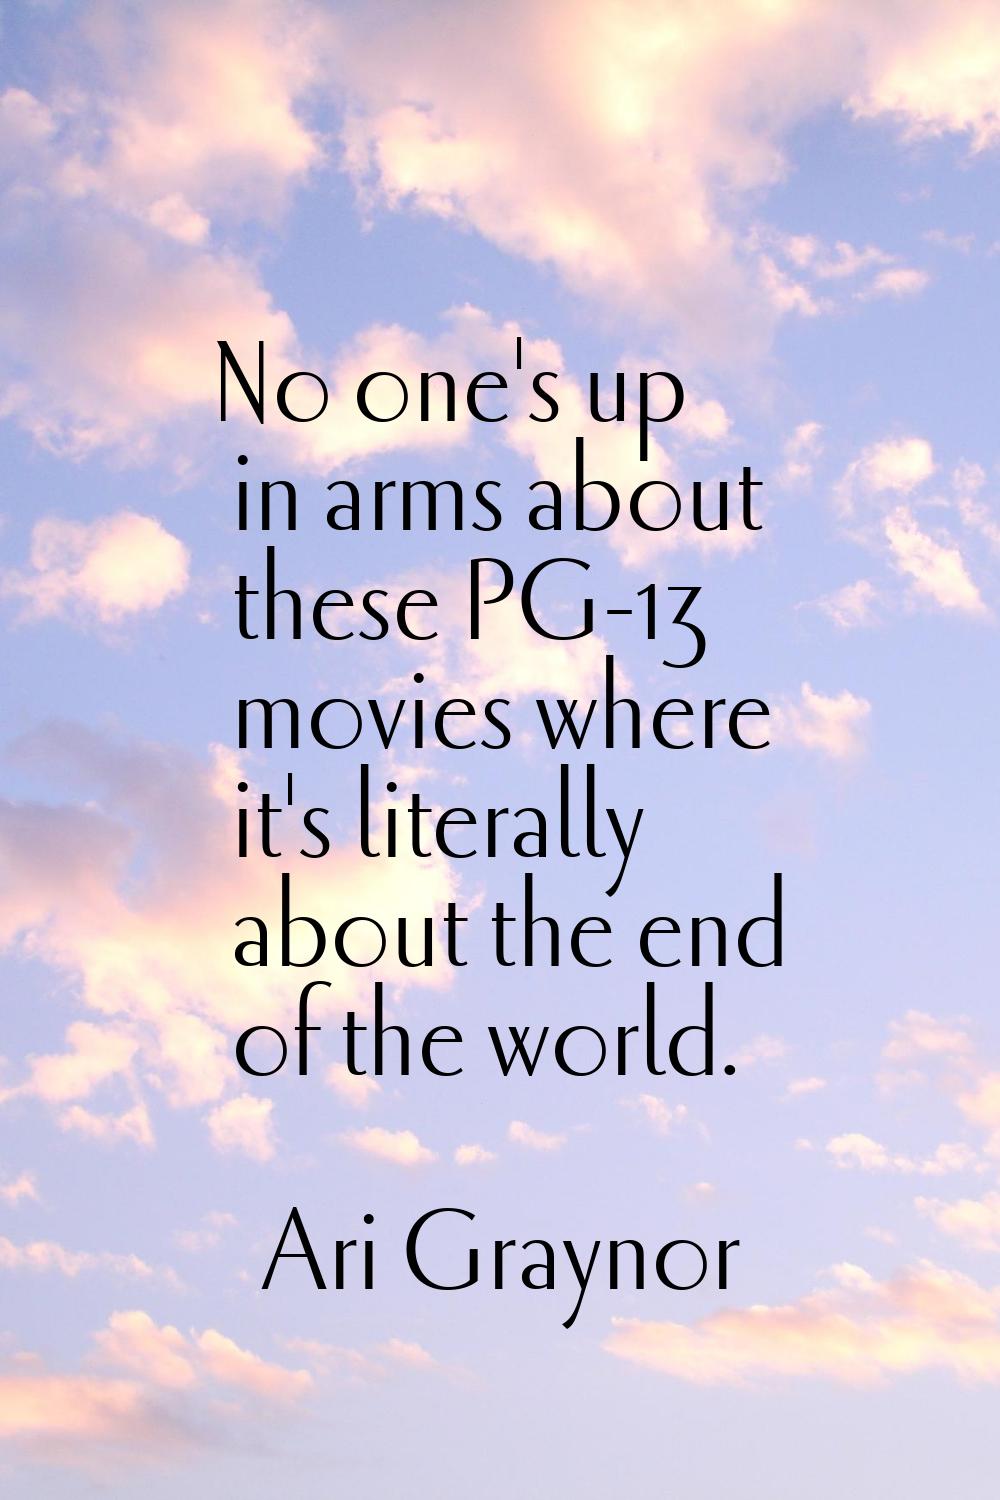 No one's up in arms about these PG-13 movies where it's literally about the end of the world.